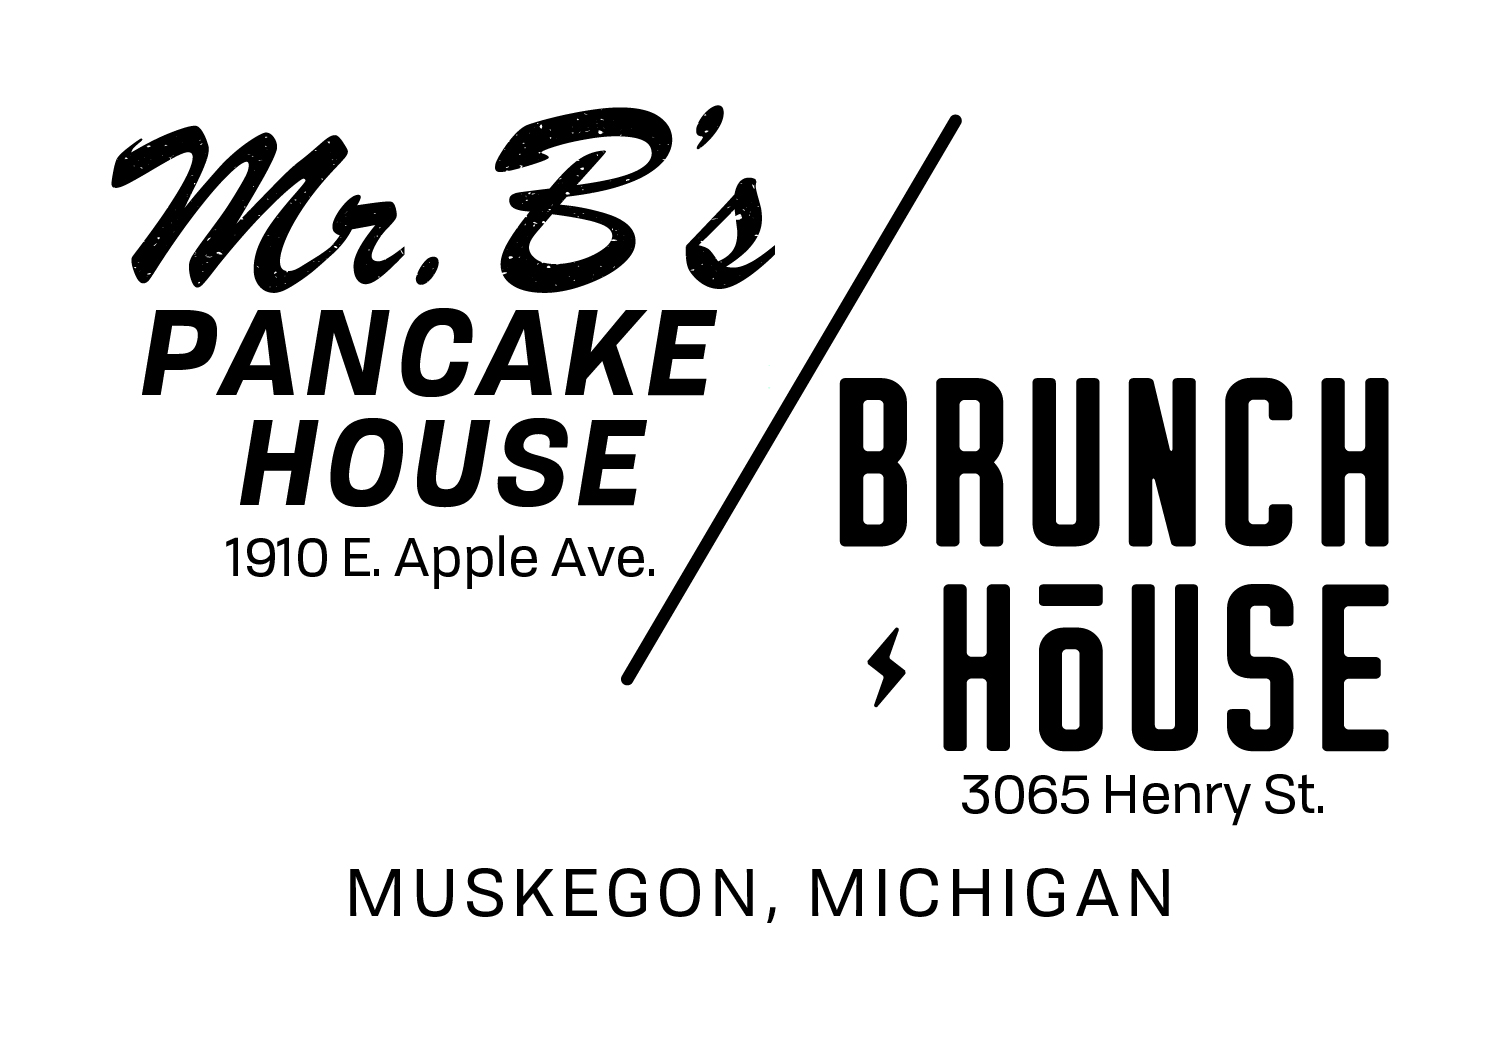 Mr B and Brunch House